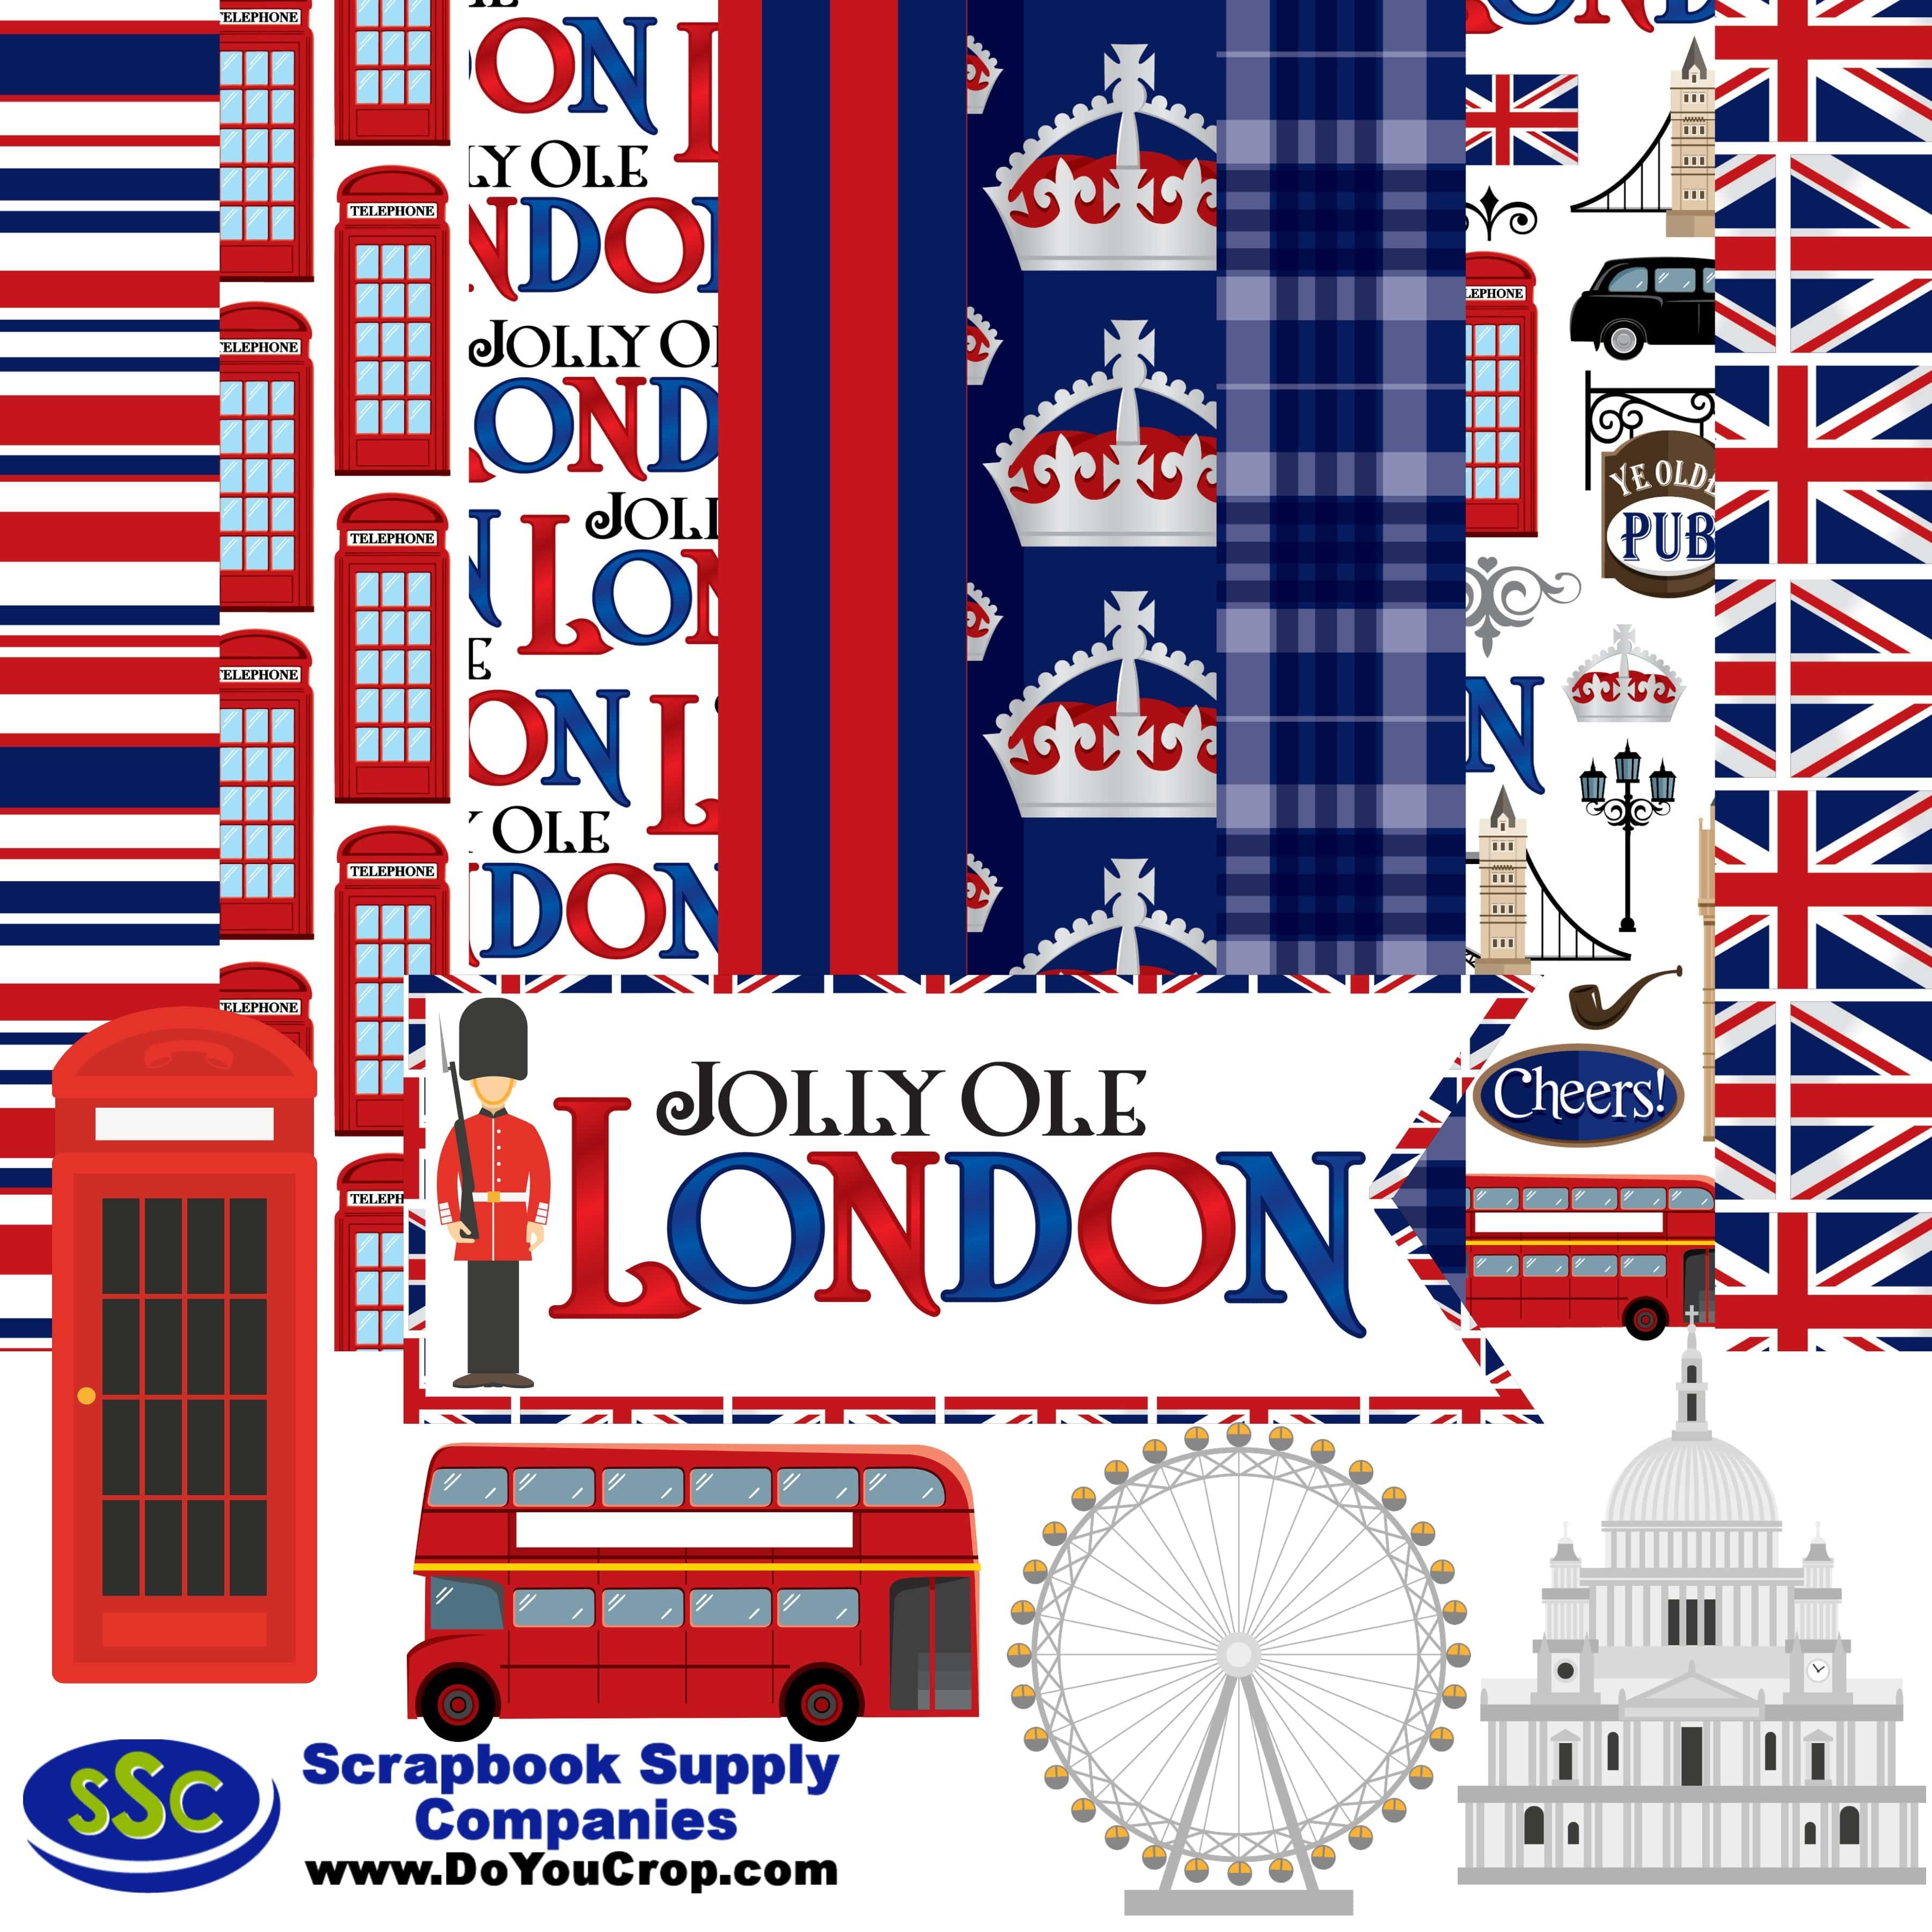 MNineDesign's Jolly Ole London 12 x 12 Scrapbook Paper & Embellishment Kit by SSC Designs - Scrapbook Supply Companies